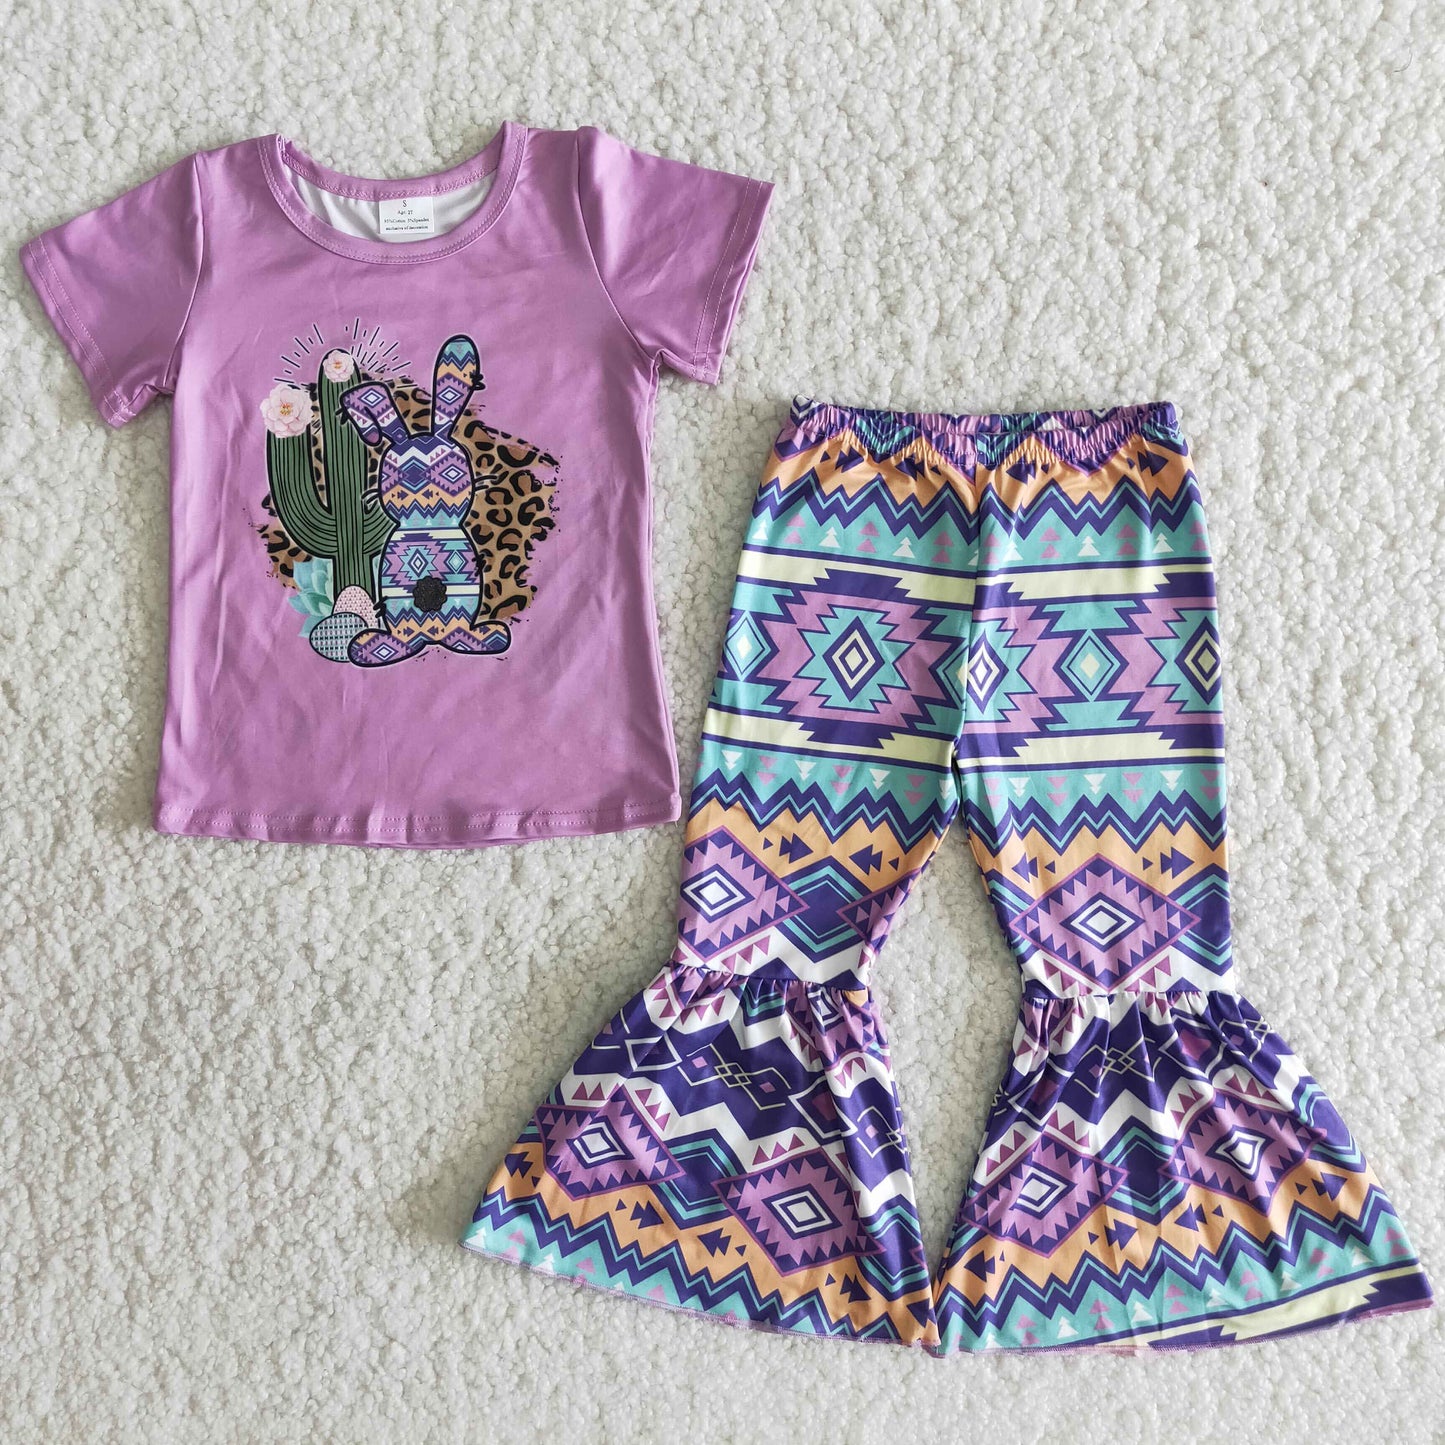 3 bunny baby girl's bleach tee leopard print bell bottom outfits